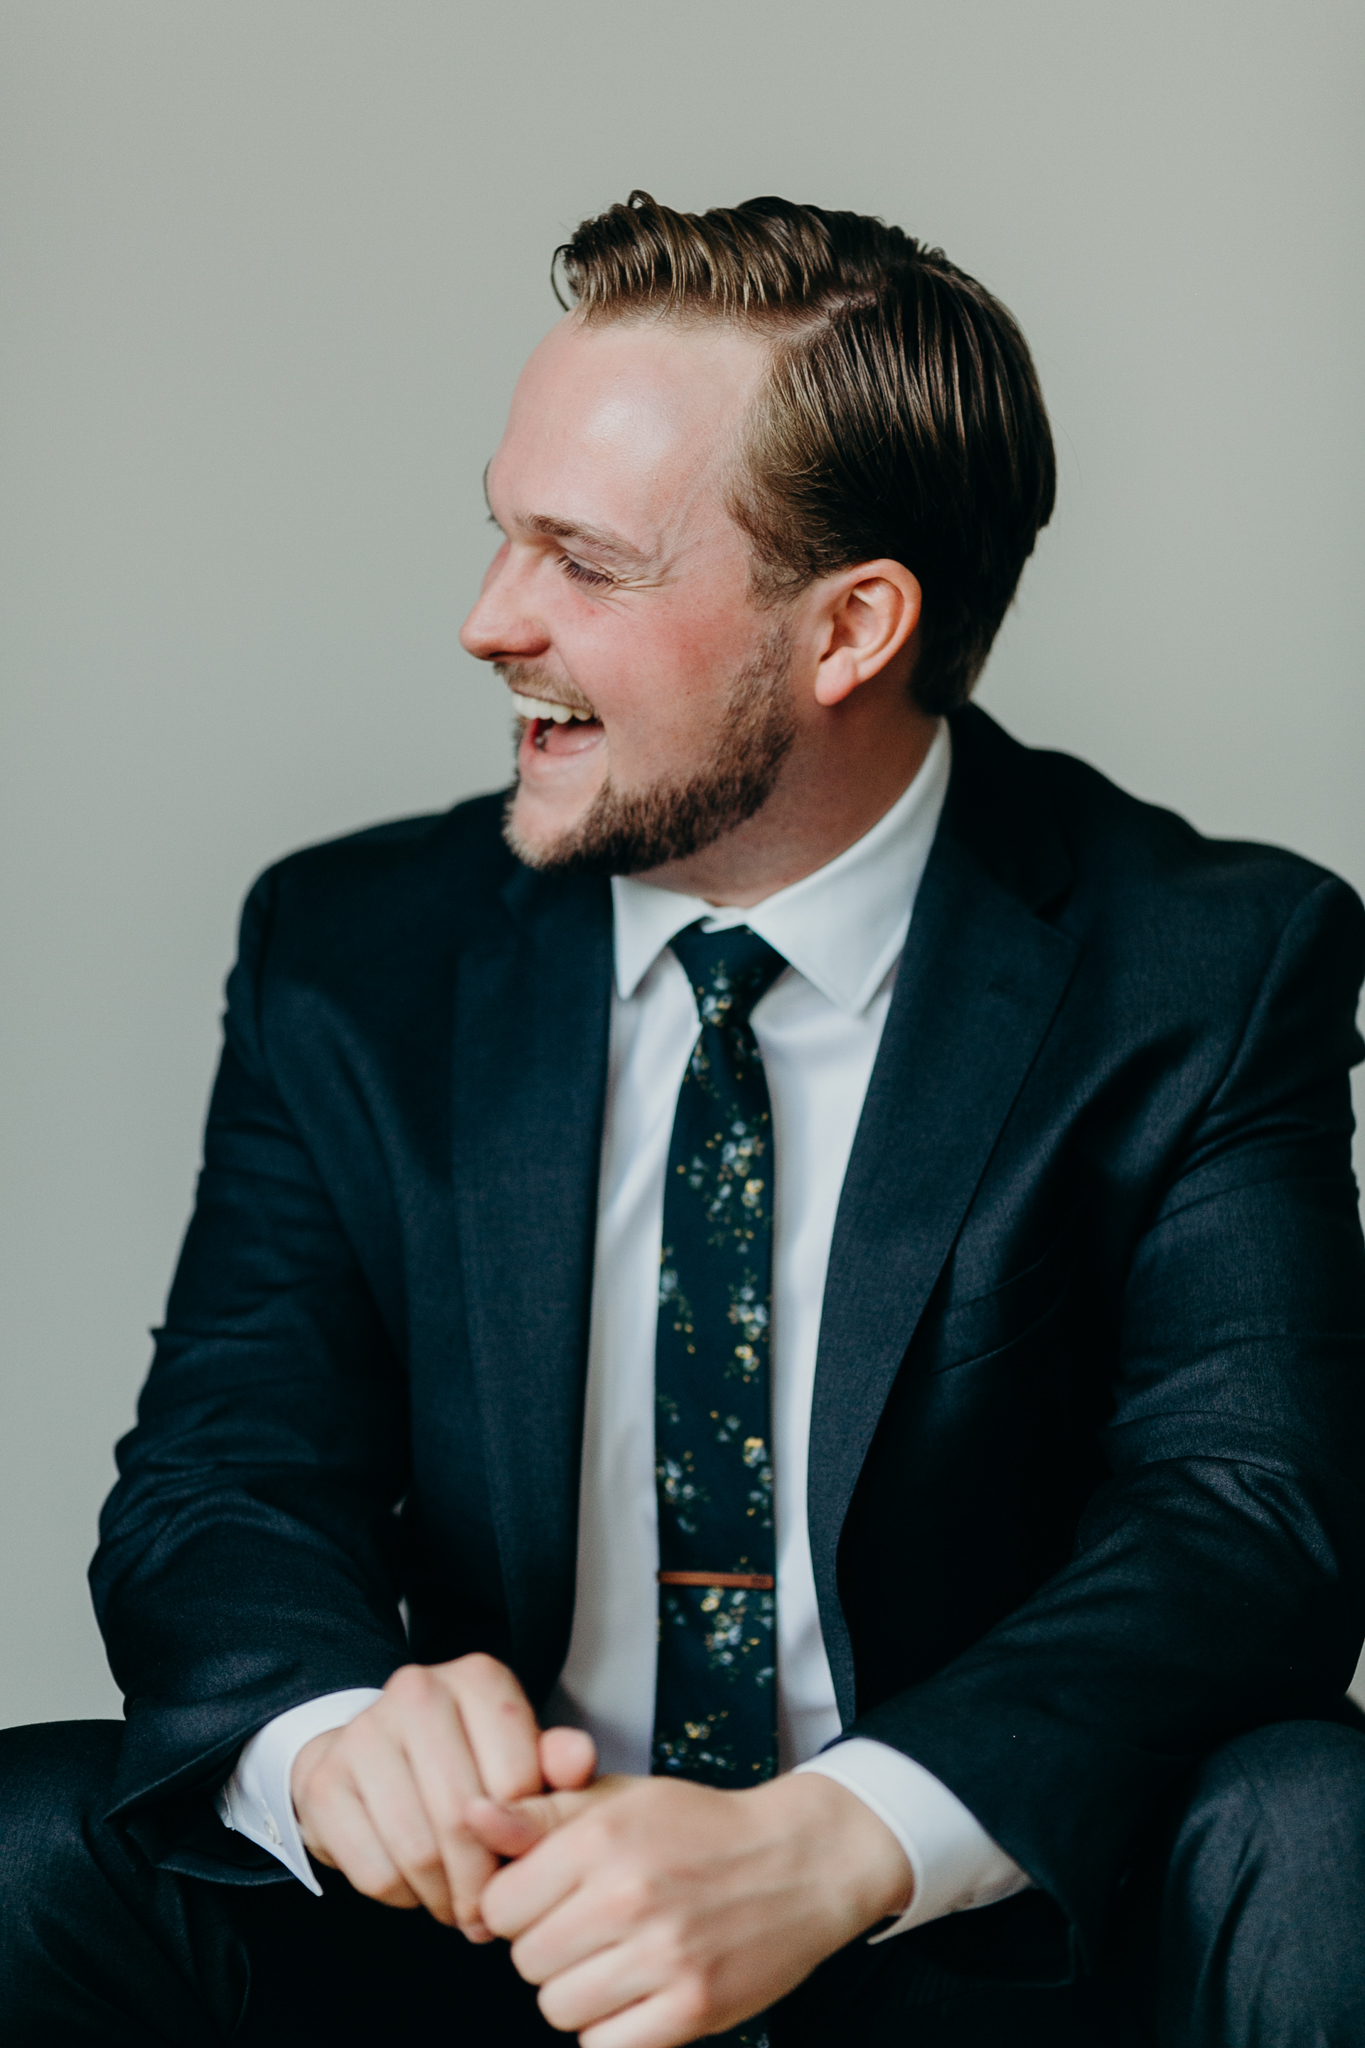 Candid portrait of groom in suit against white wall laughing